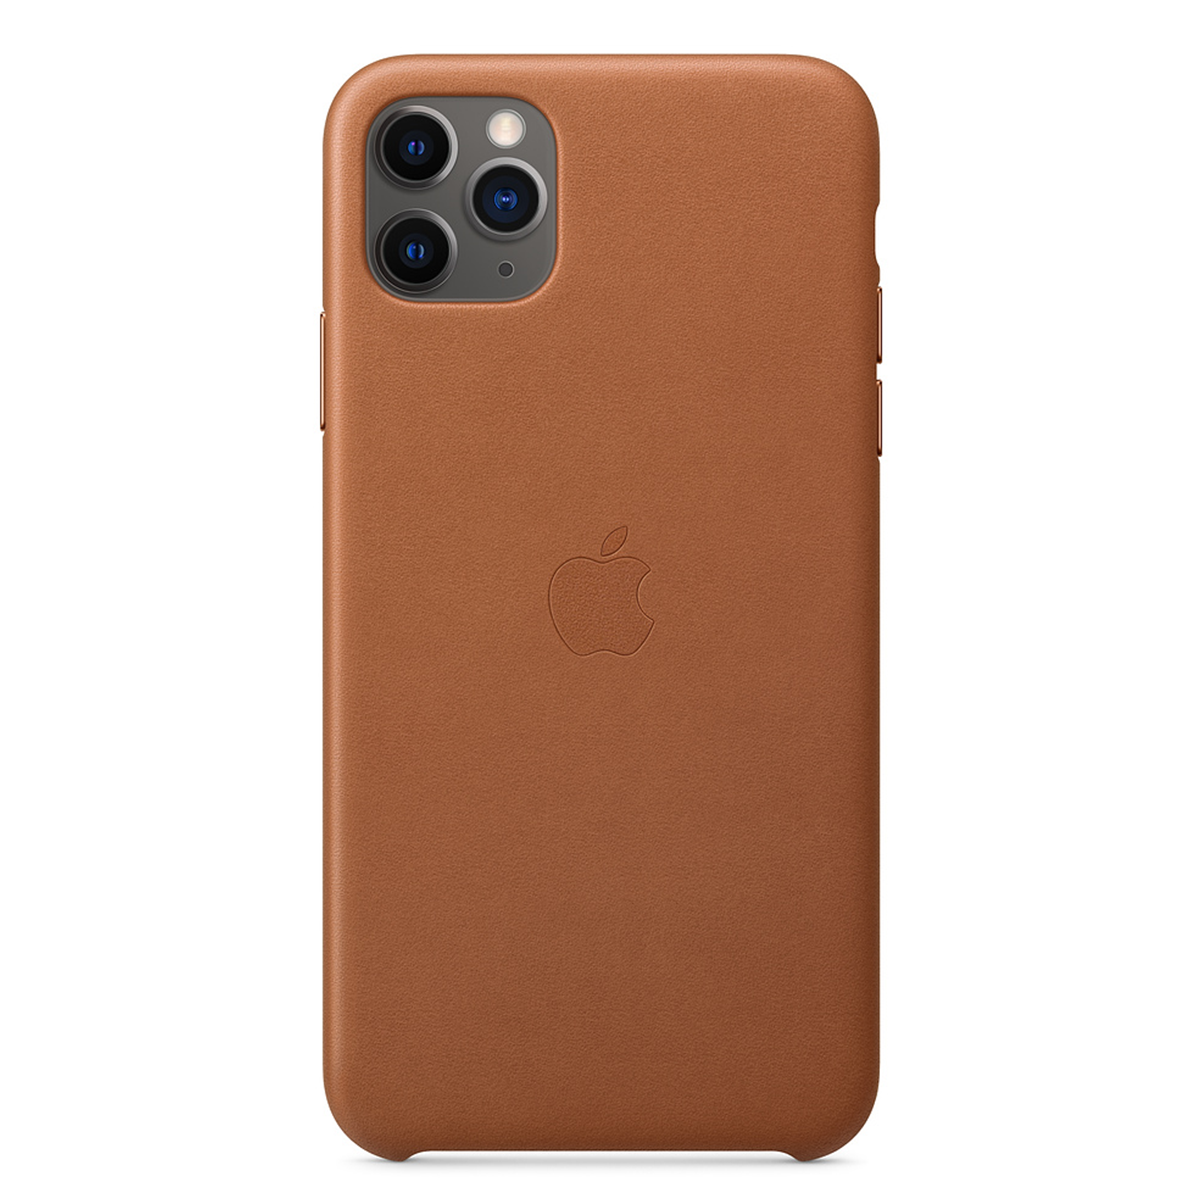 iPhone 11 Pro Max Leather Case Saddle Brown